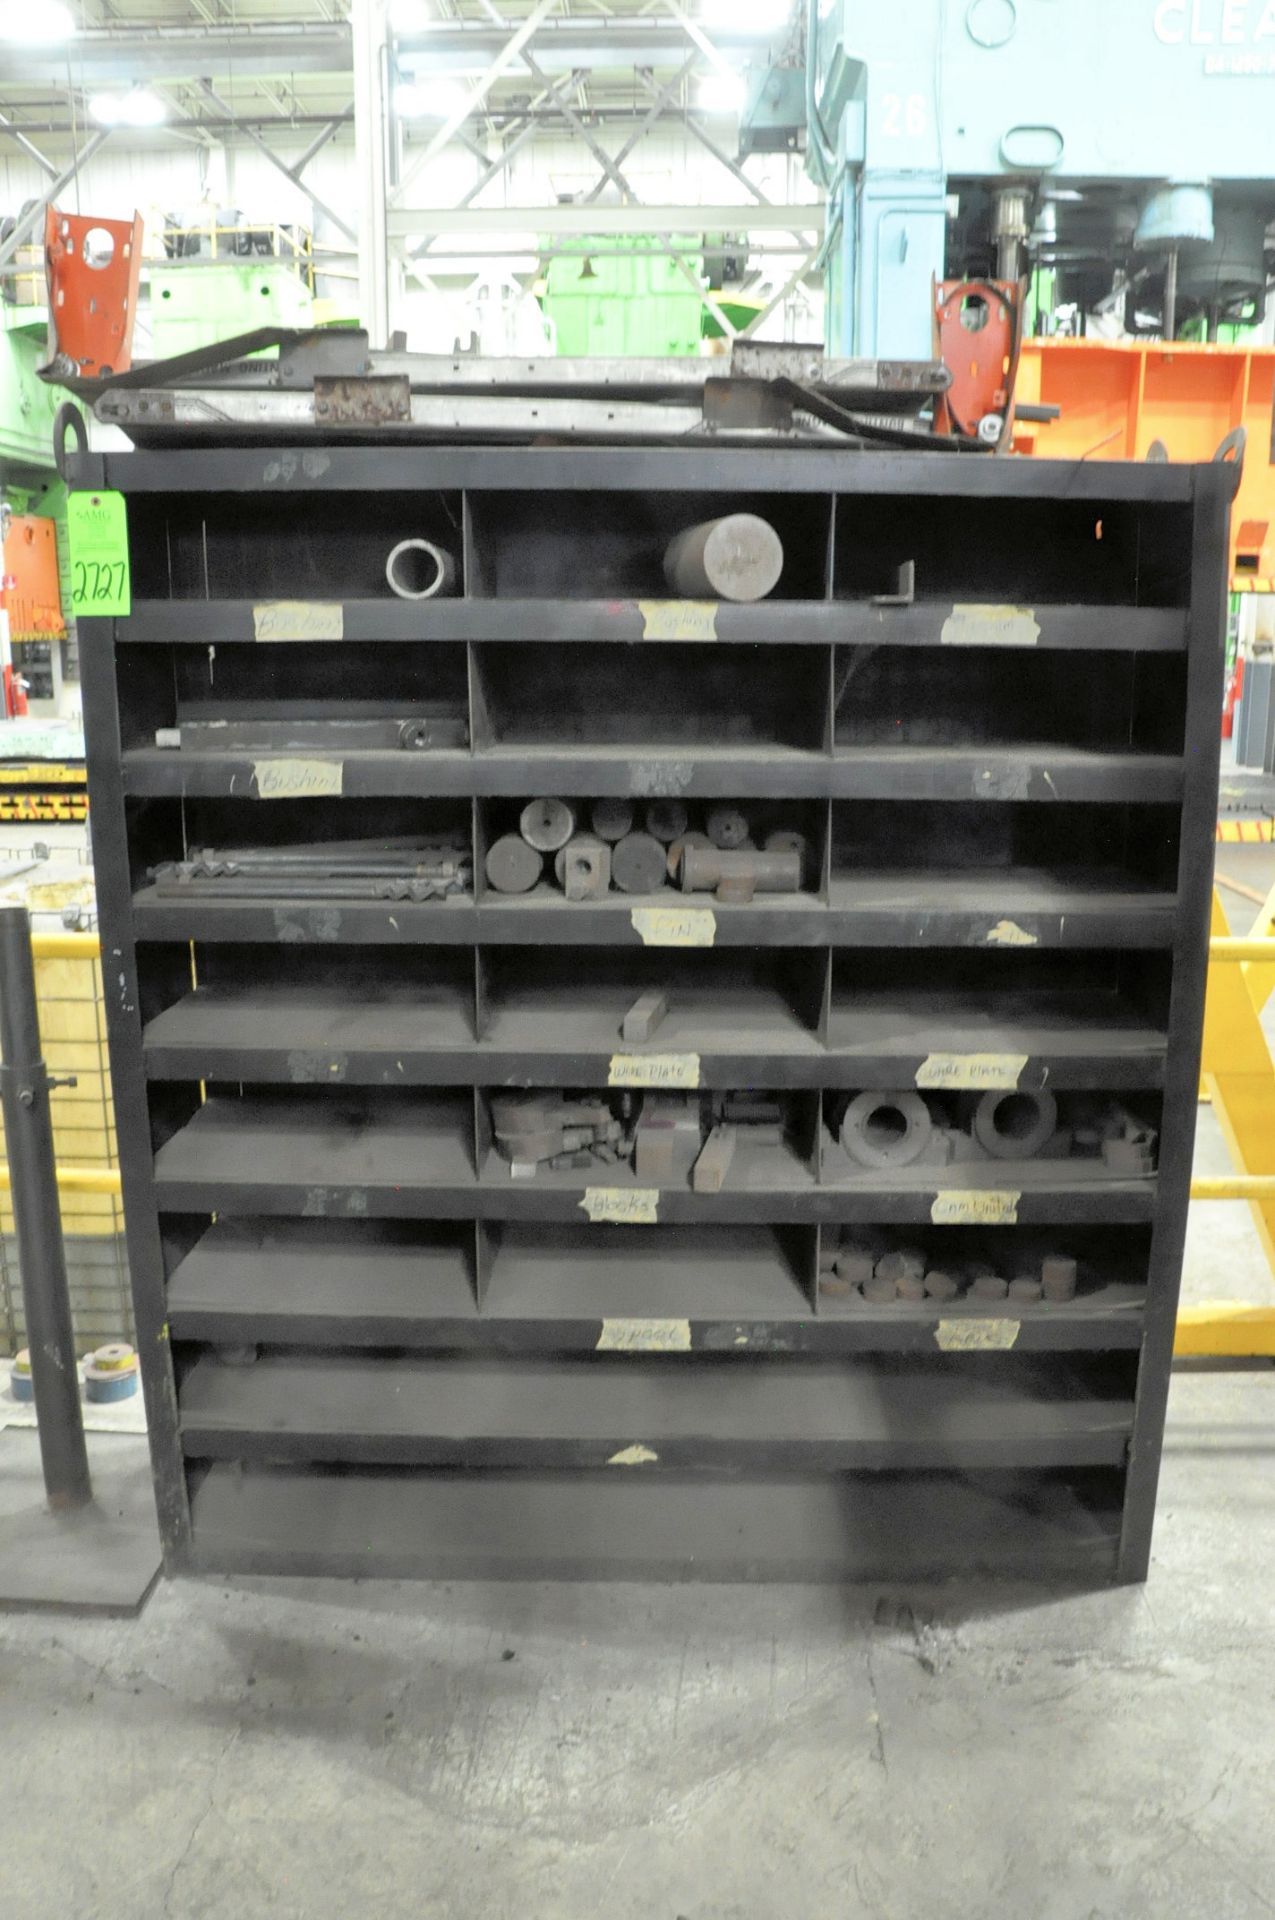 Lot-Solid Steel Cutoffs etc. with (5) Sections Shelving, (Warehouse Room), (Green Tag) - Image 4 of 6